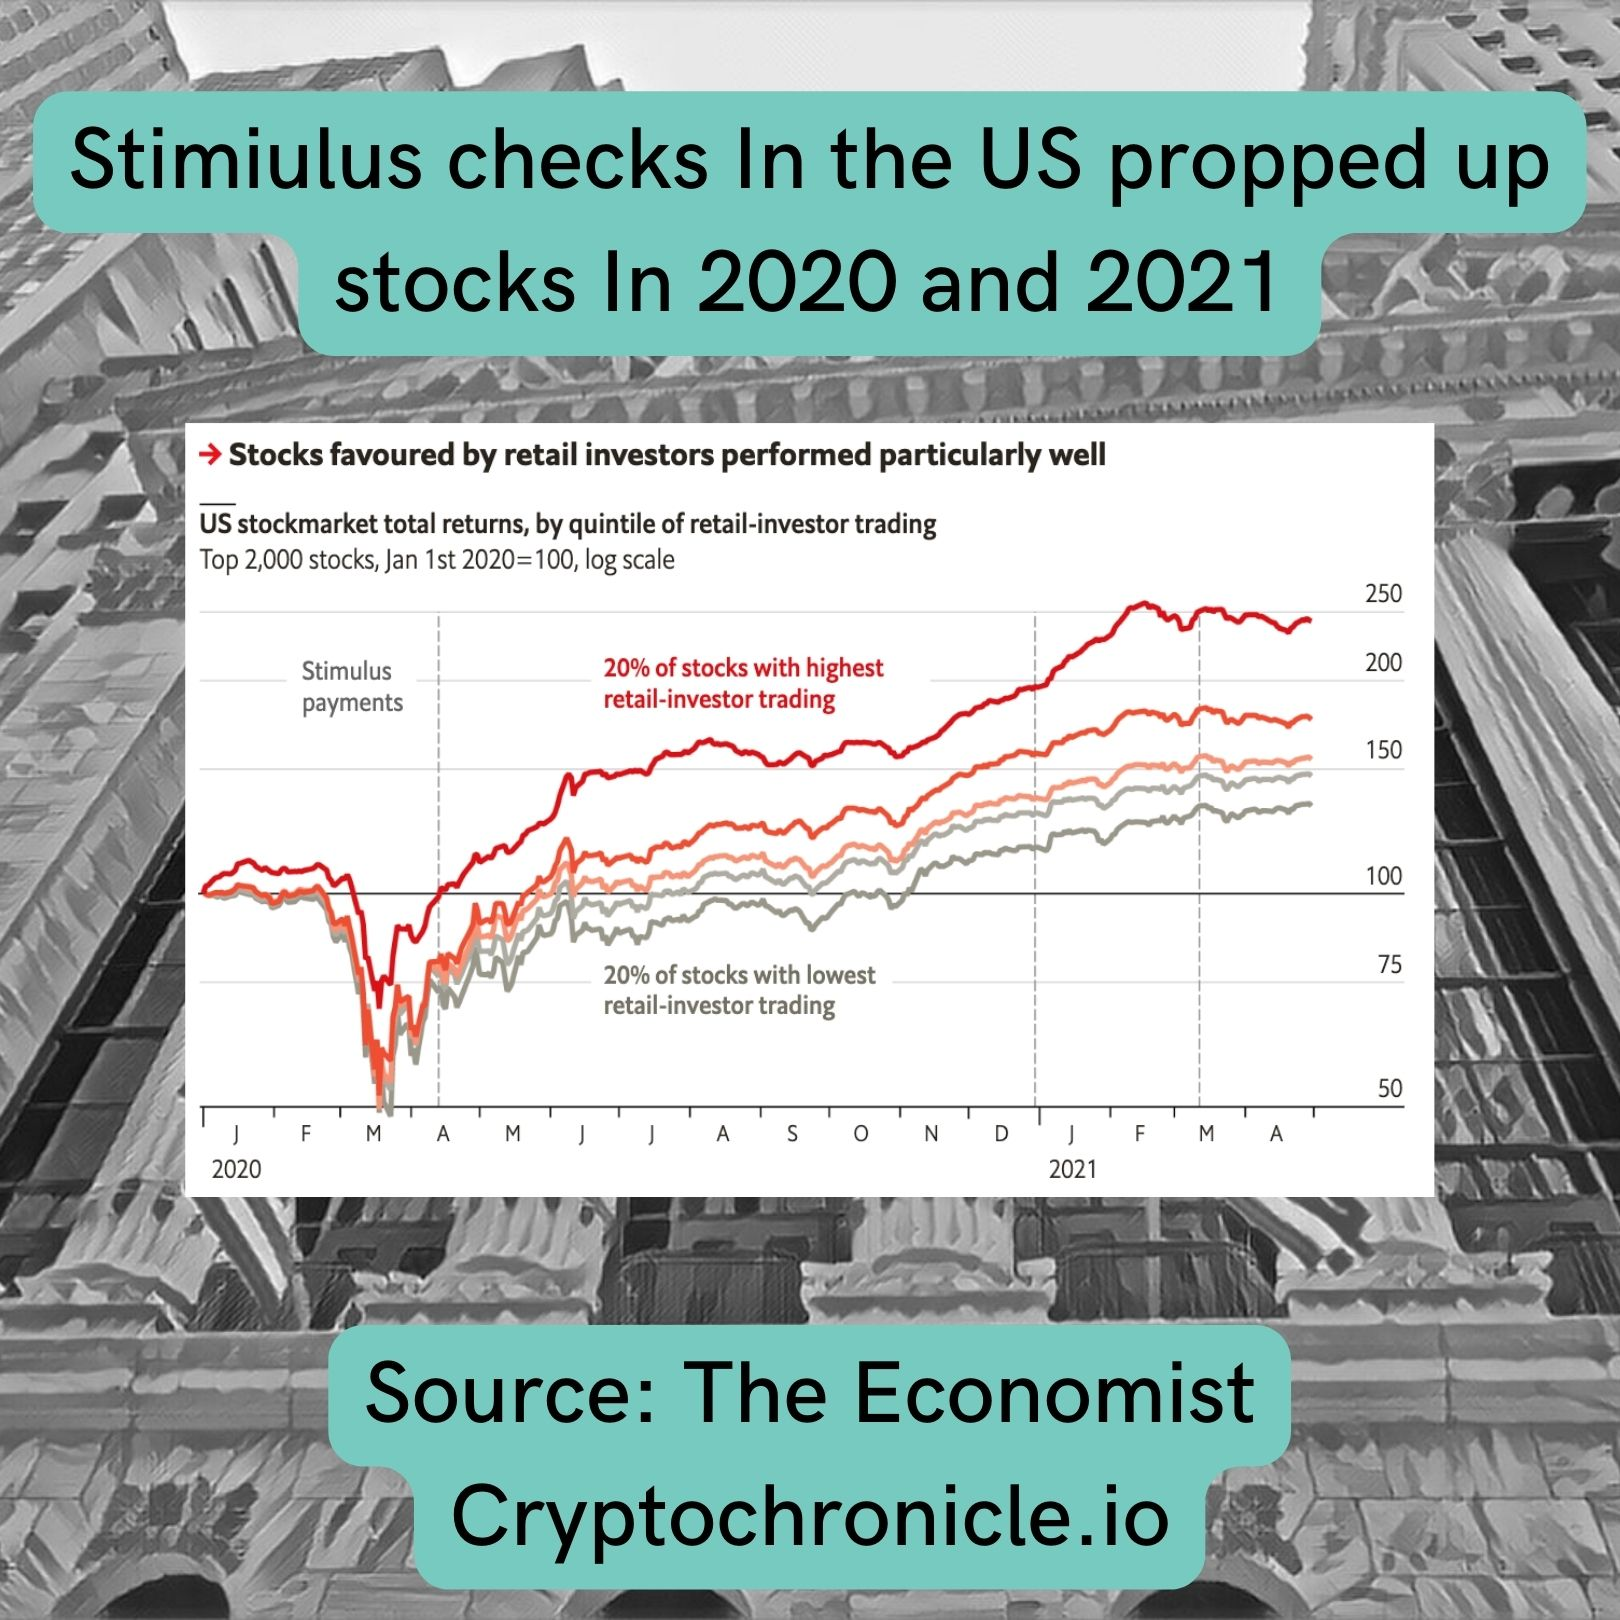 This chart shows how stimulus checks issued to americans during the COVID-19 pandemic raised the stock market prices. These checks also raised the prices of cryptocurrency. 